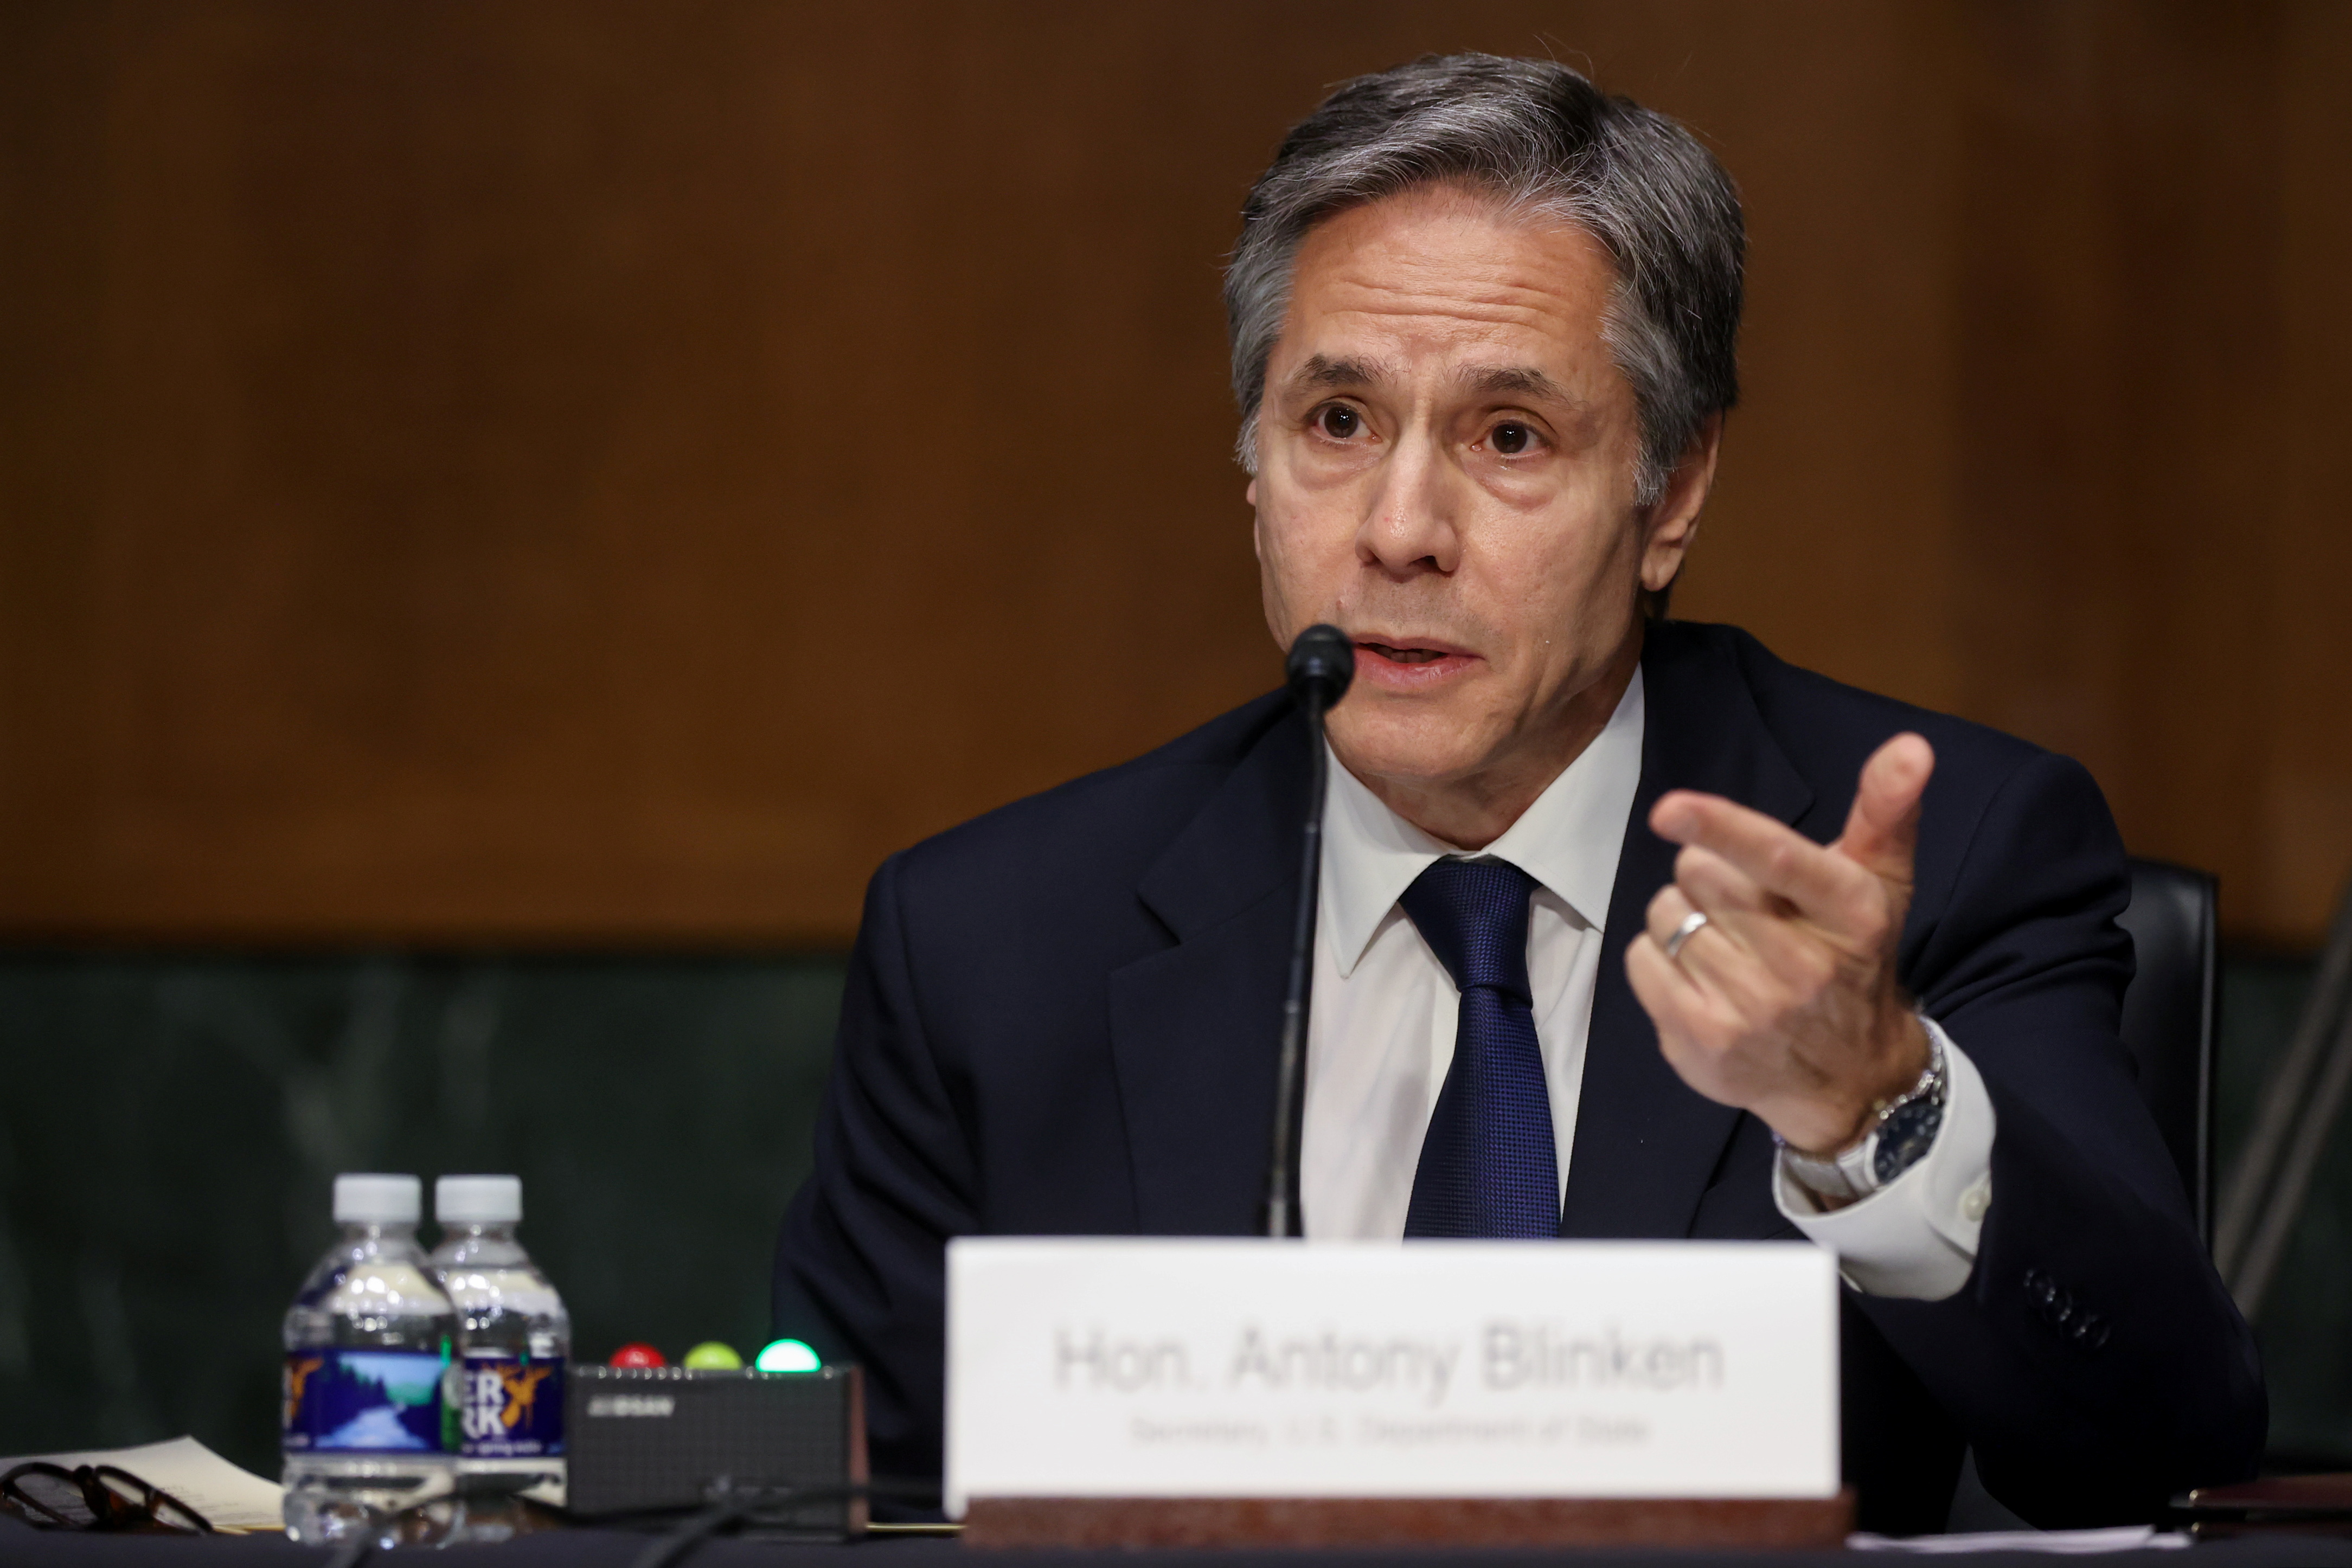 U.S. Secretary of State Blinken testifies about the State Department budget before the Senate Appropriations Committee on Capitol Hill in Washington